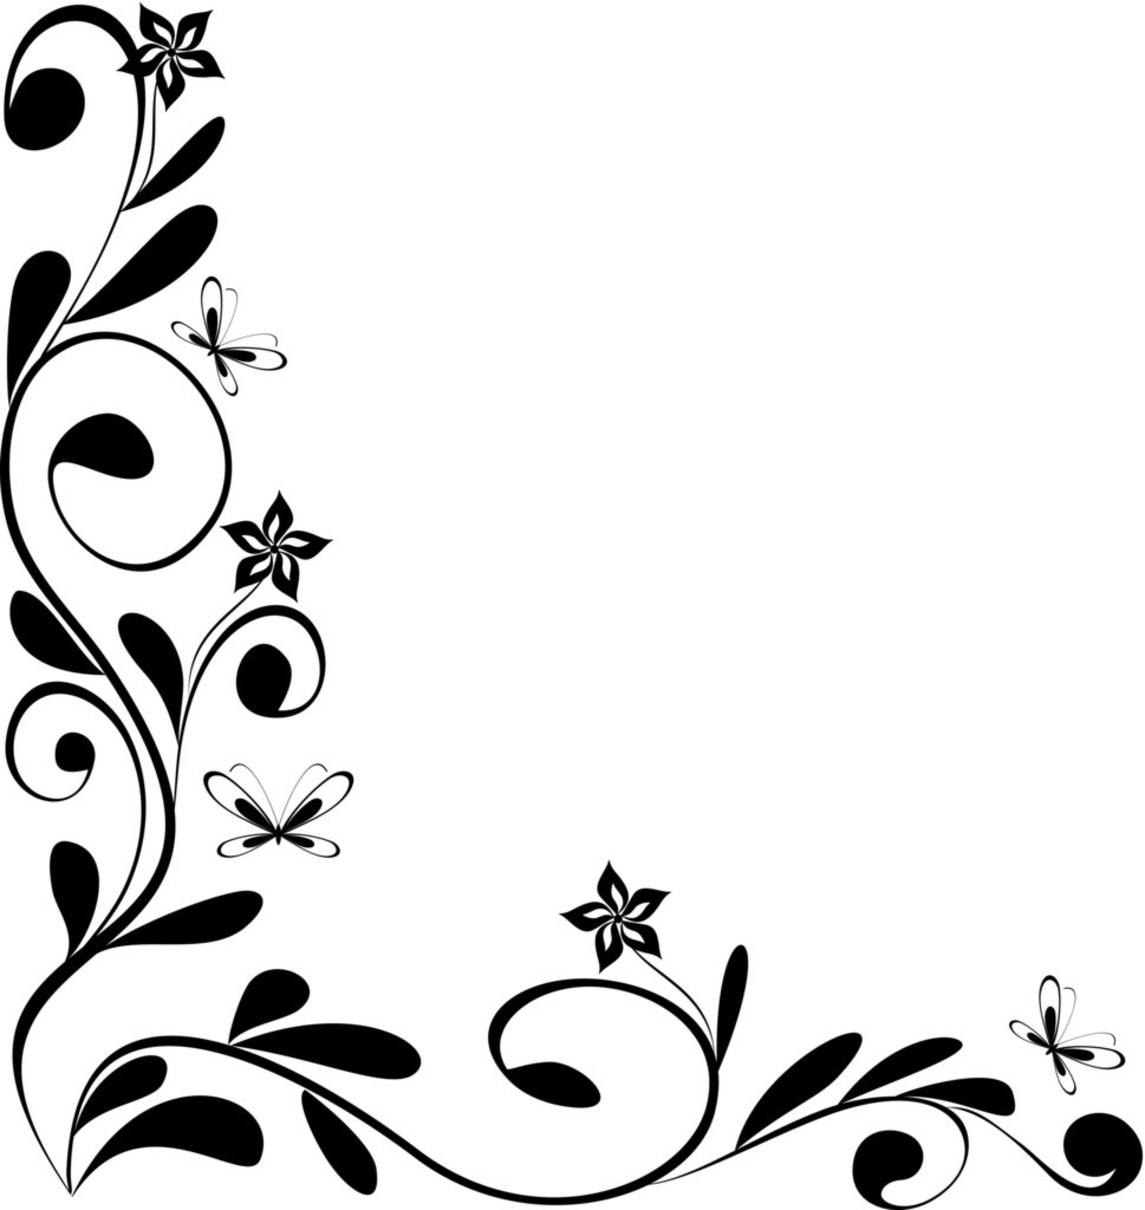 Cool Border Designs - Clipart library